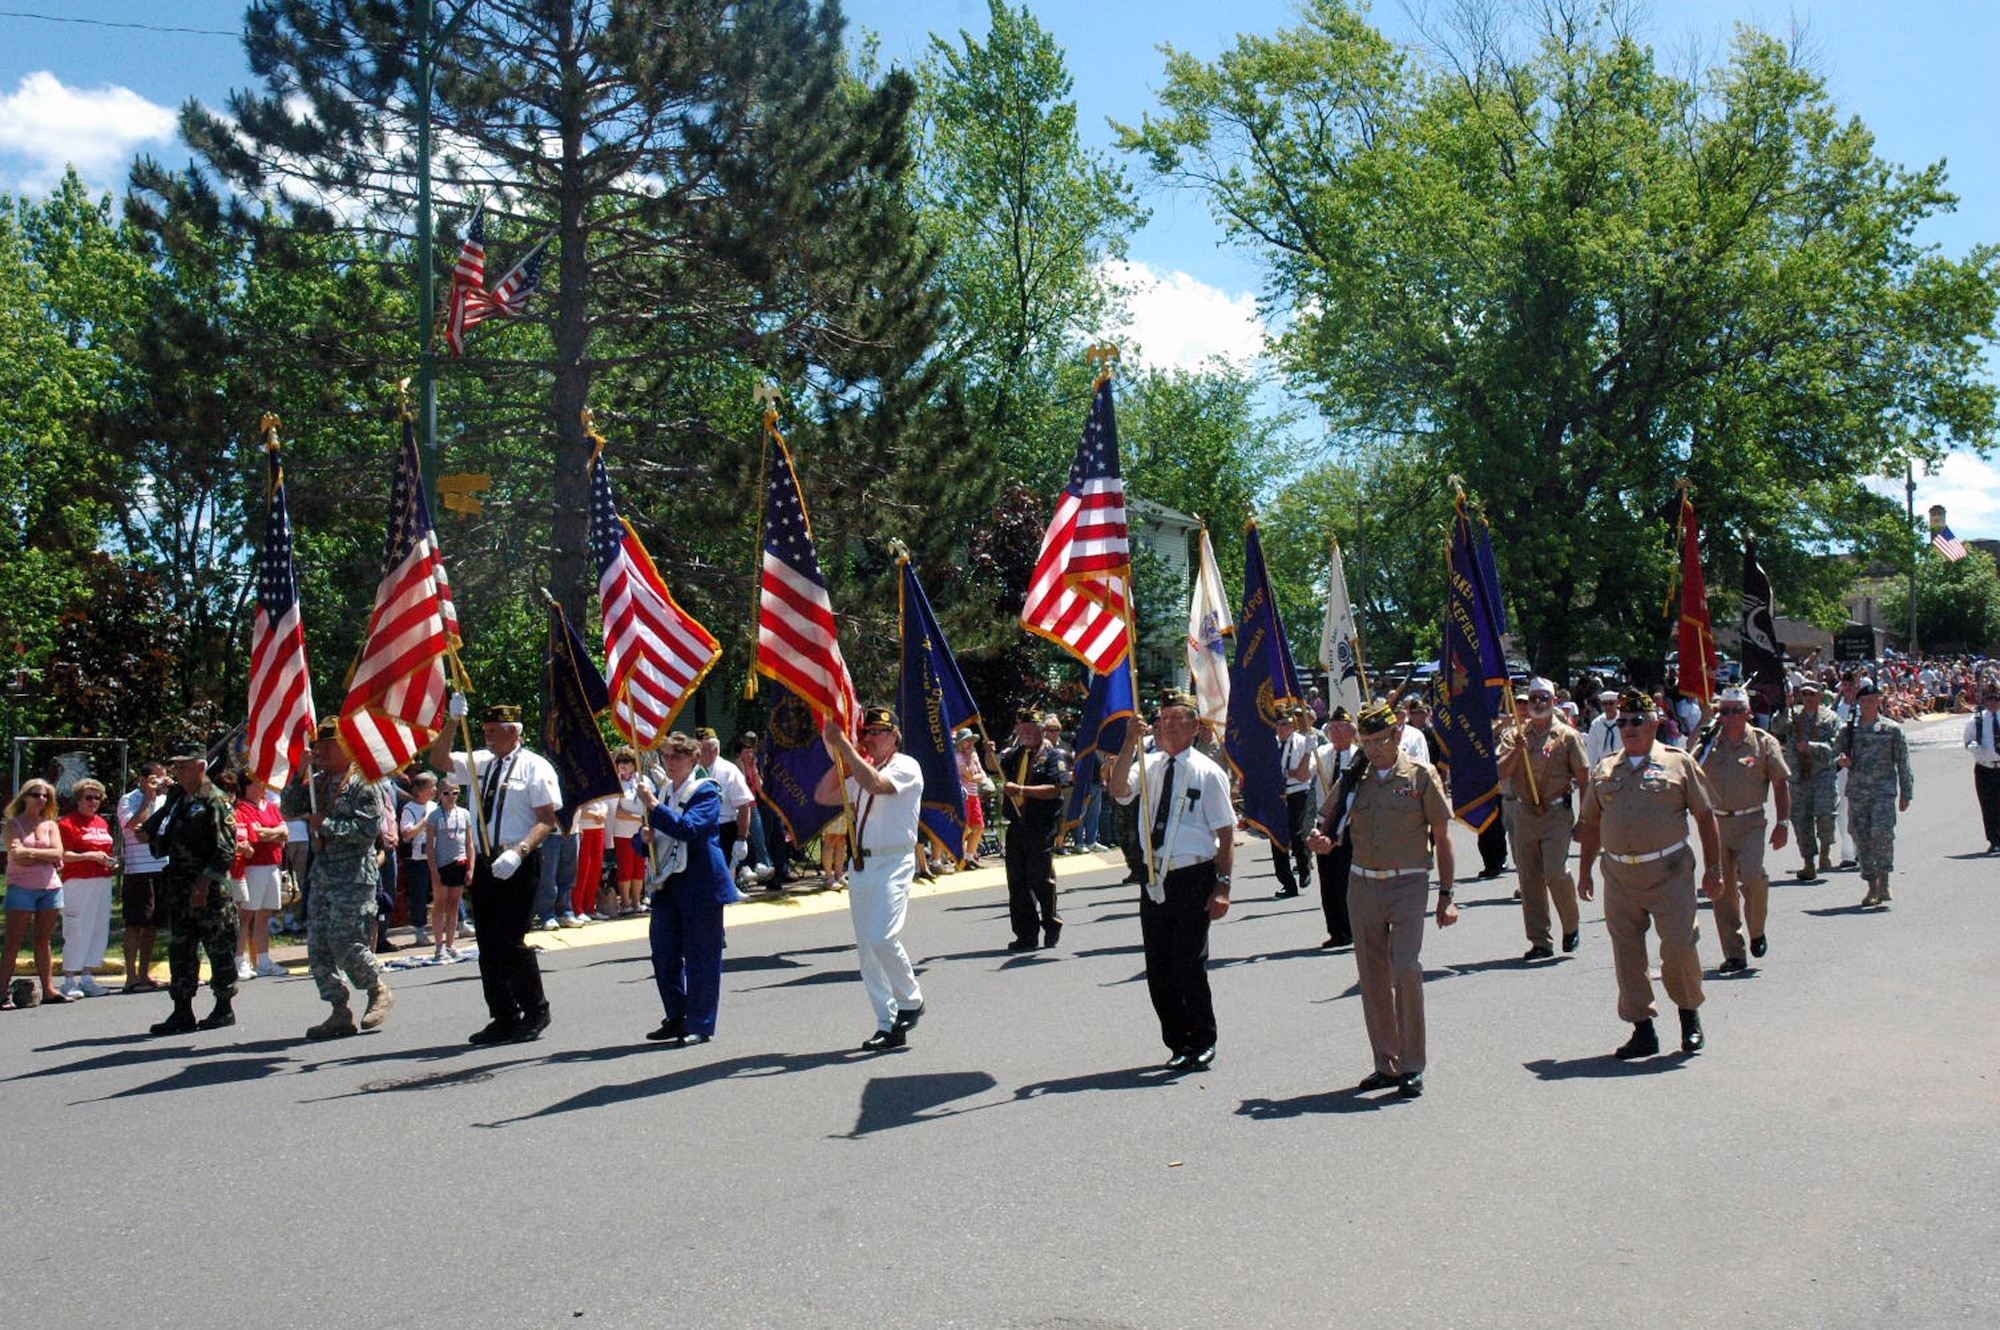 Members of the Veterans of Foreign Wars Post 9084 Color Guard march down Main Street of Wakefield, Mich., for the Independence Day Parade July 4, 2008.  (U.S. Air Force Photo/Bobbi Sturkol)